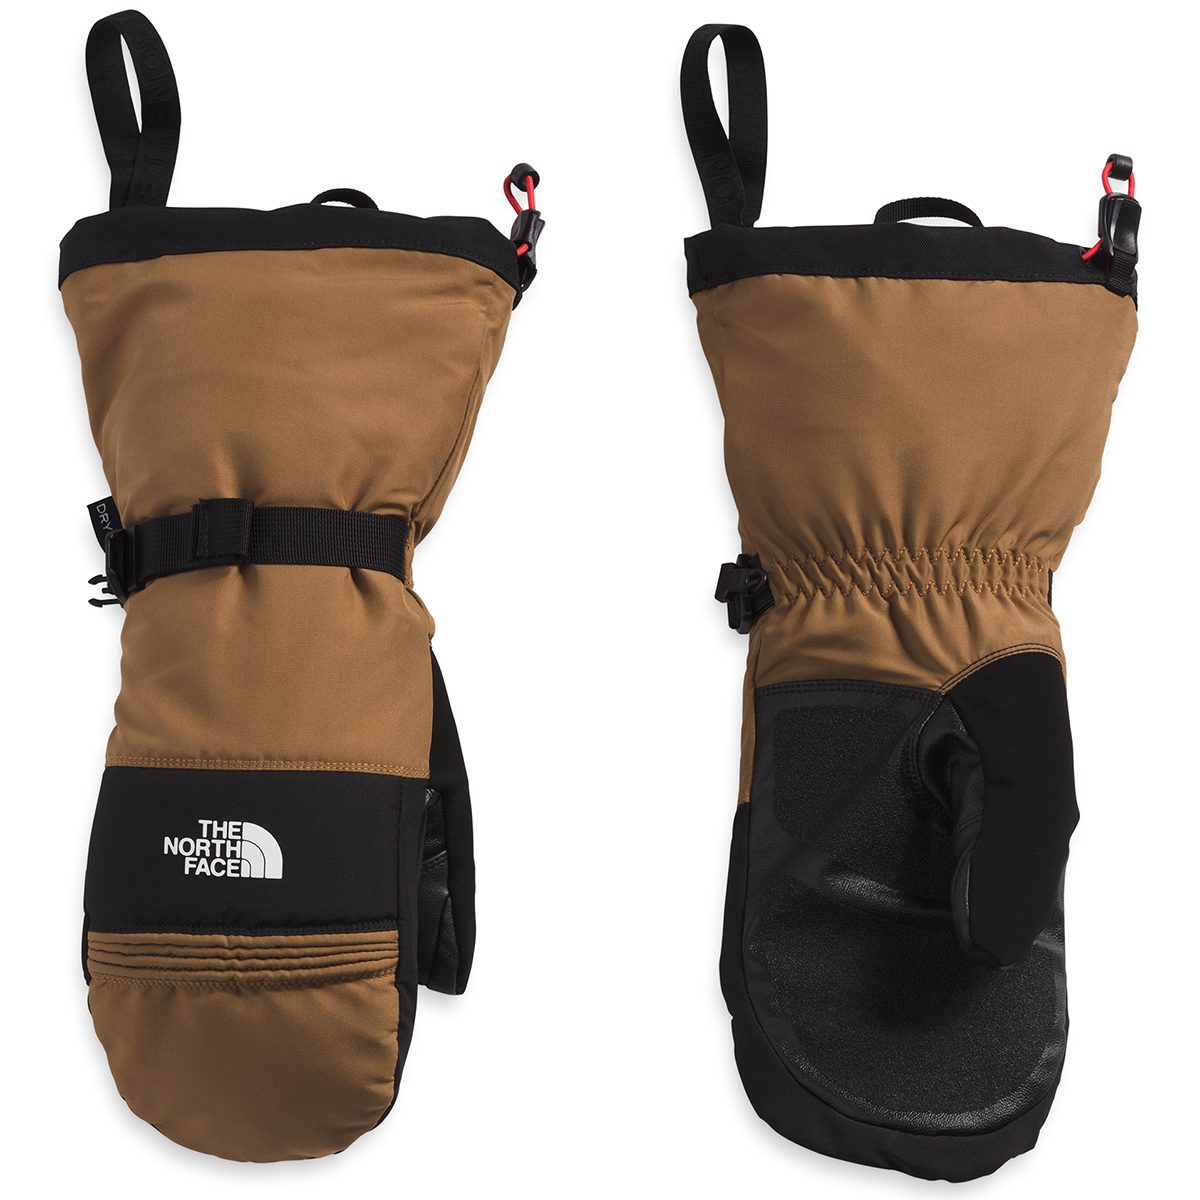 The North Face Men's Montana Ski Mitts